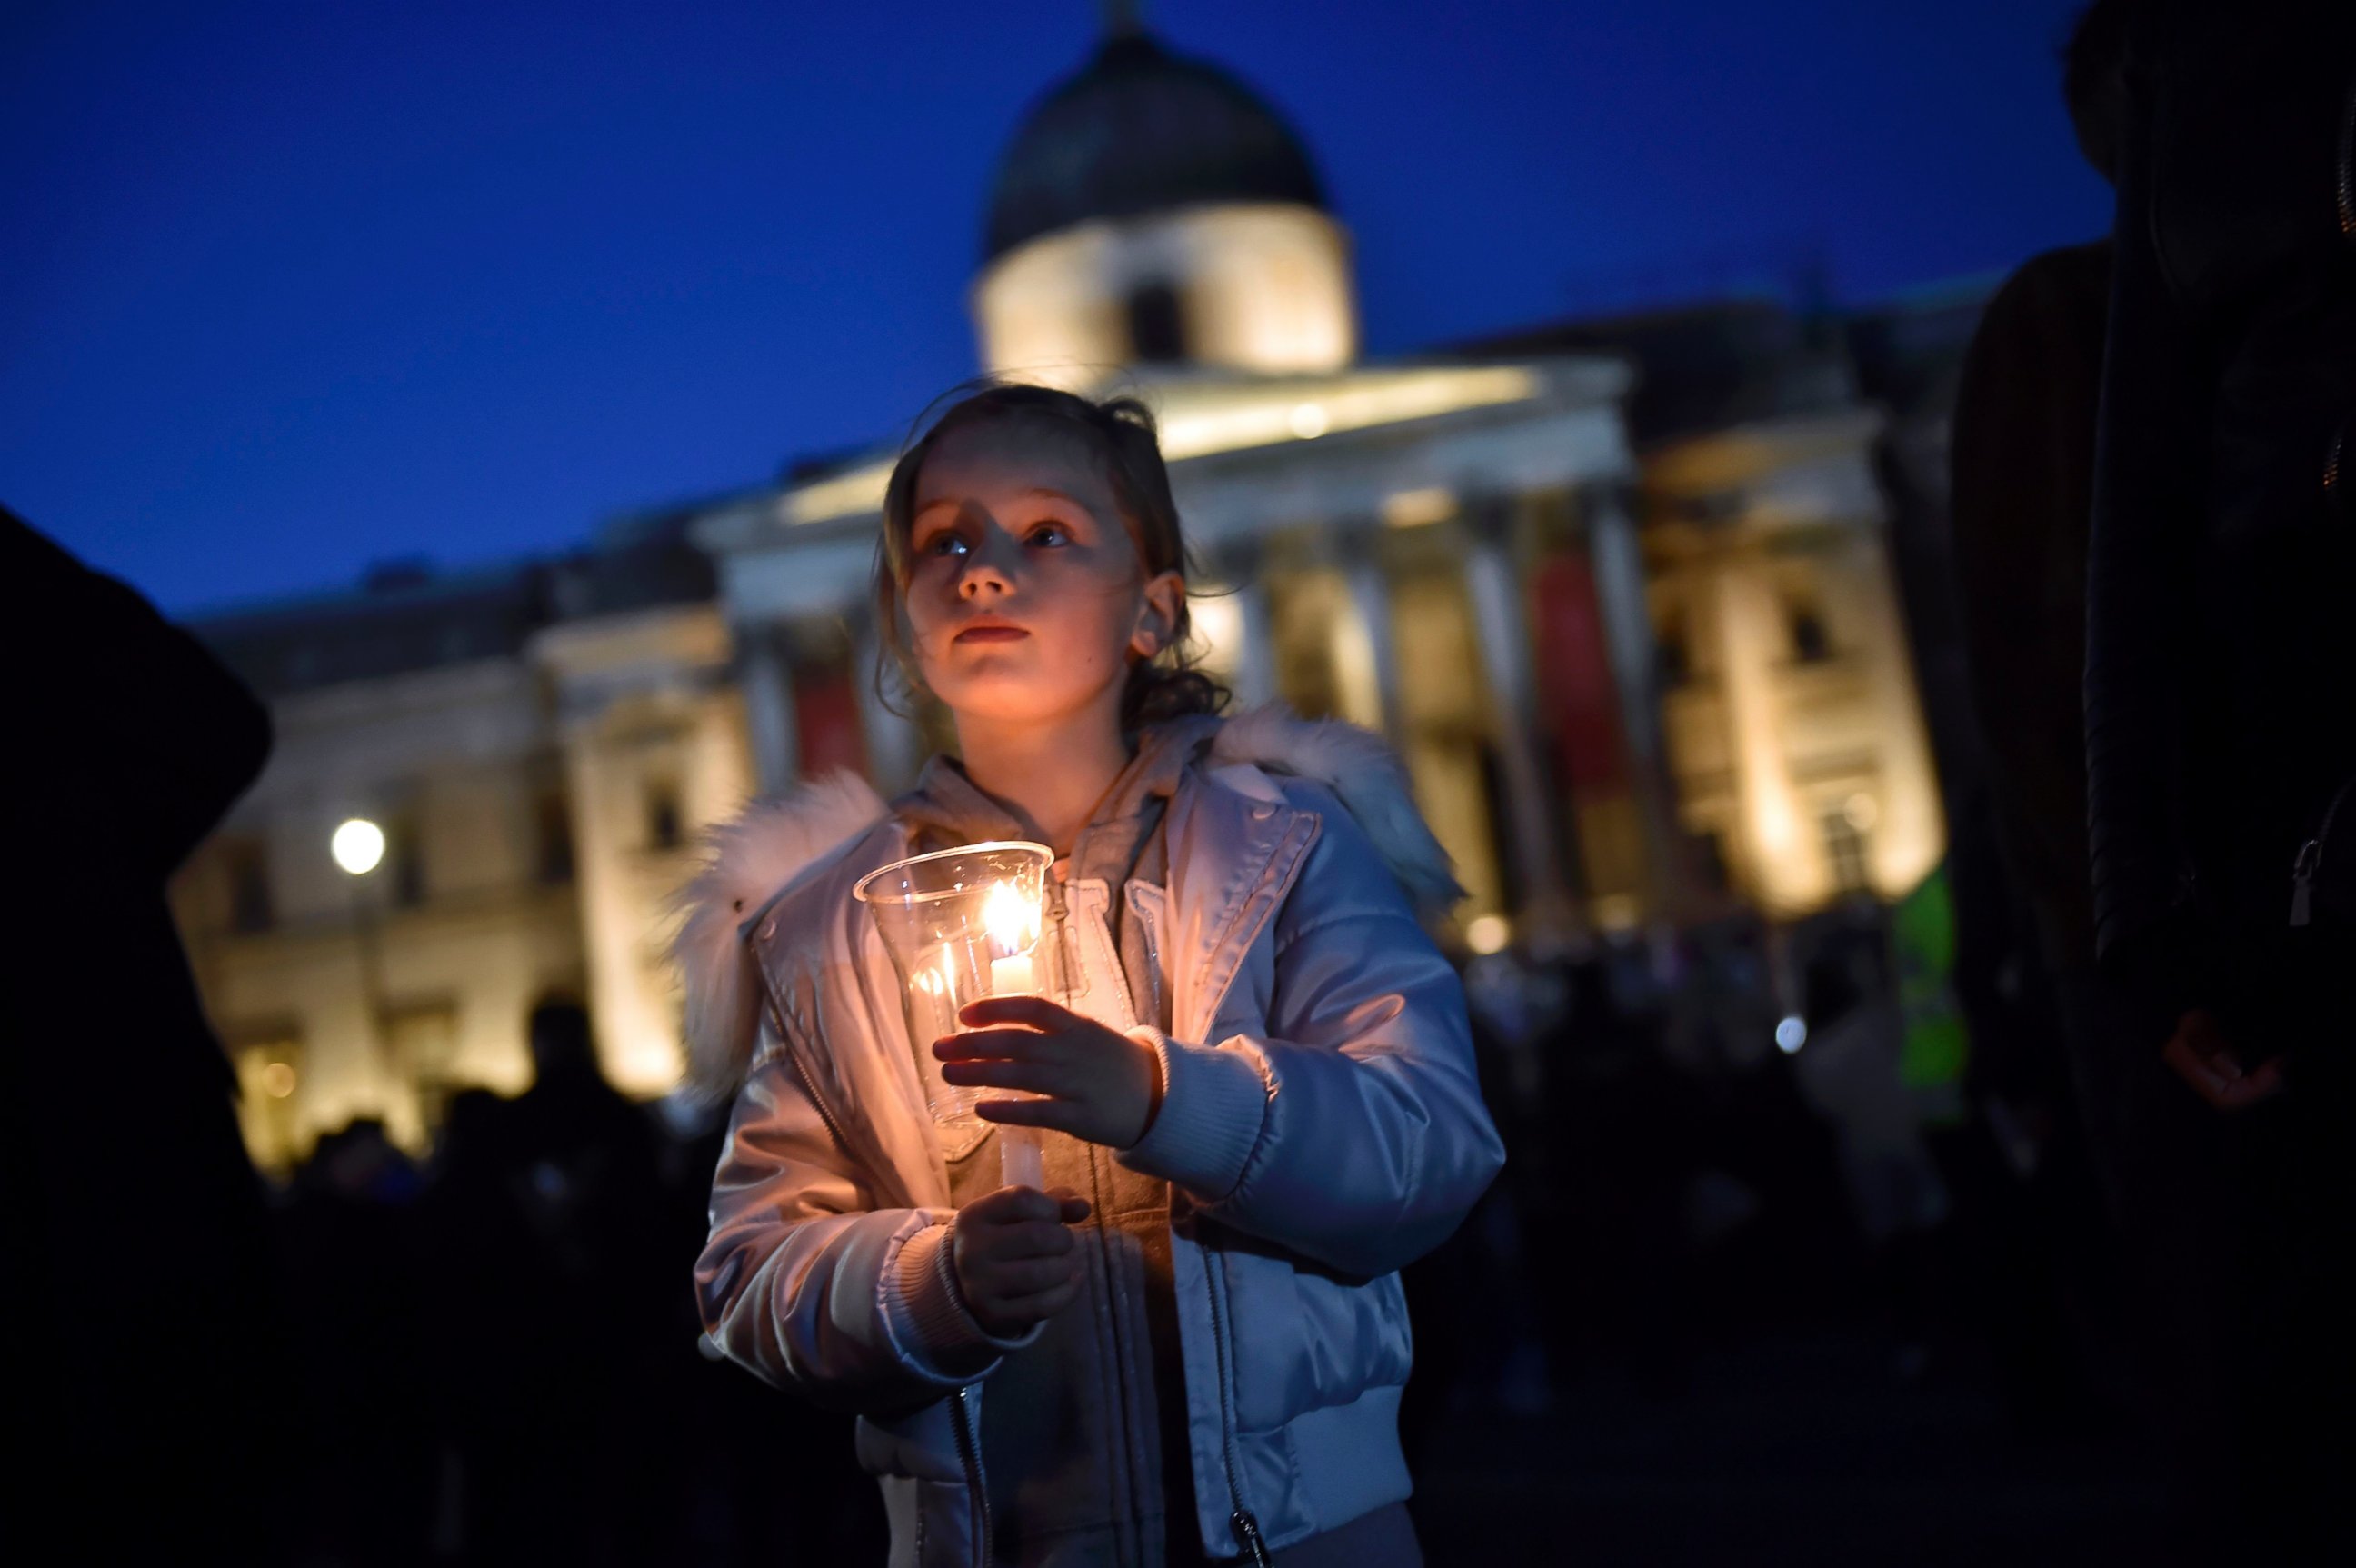 PHOTO: People light candles at a vigil in Trafalgar Square the day after an attack, in London, March 23, 2017.  